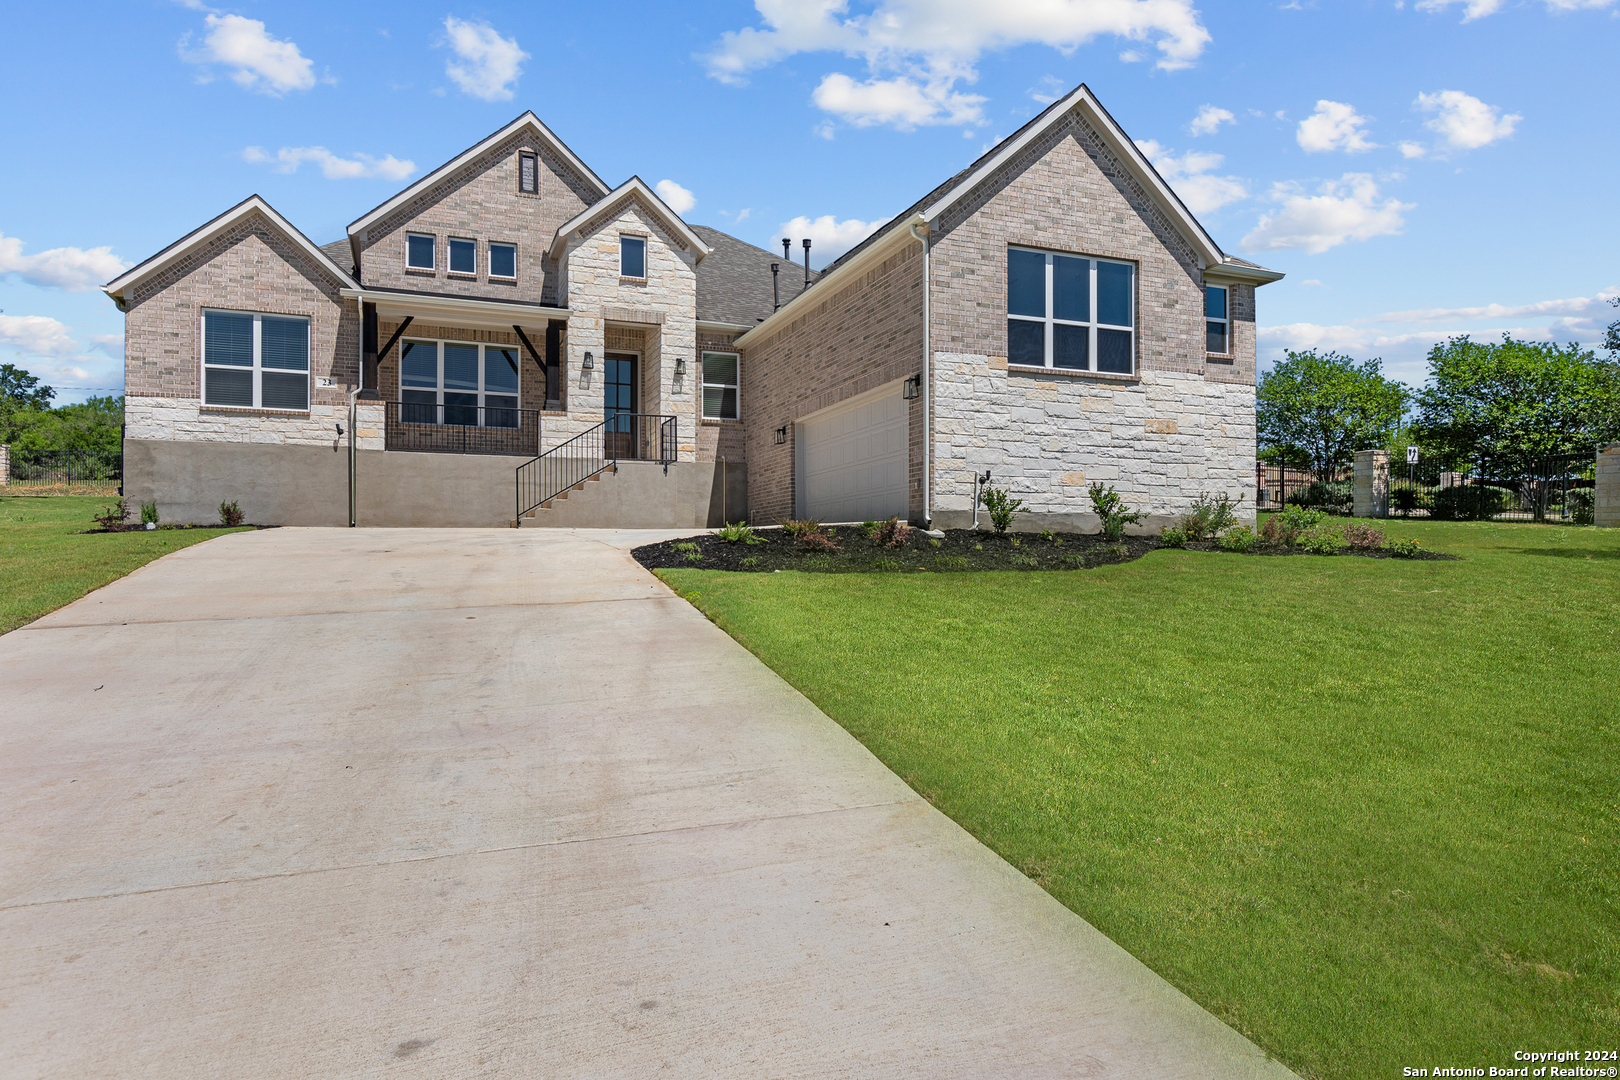 Photo of 23 Cattle Dr in Castroville, TX